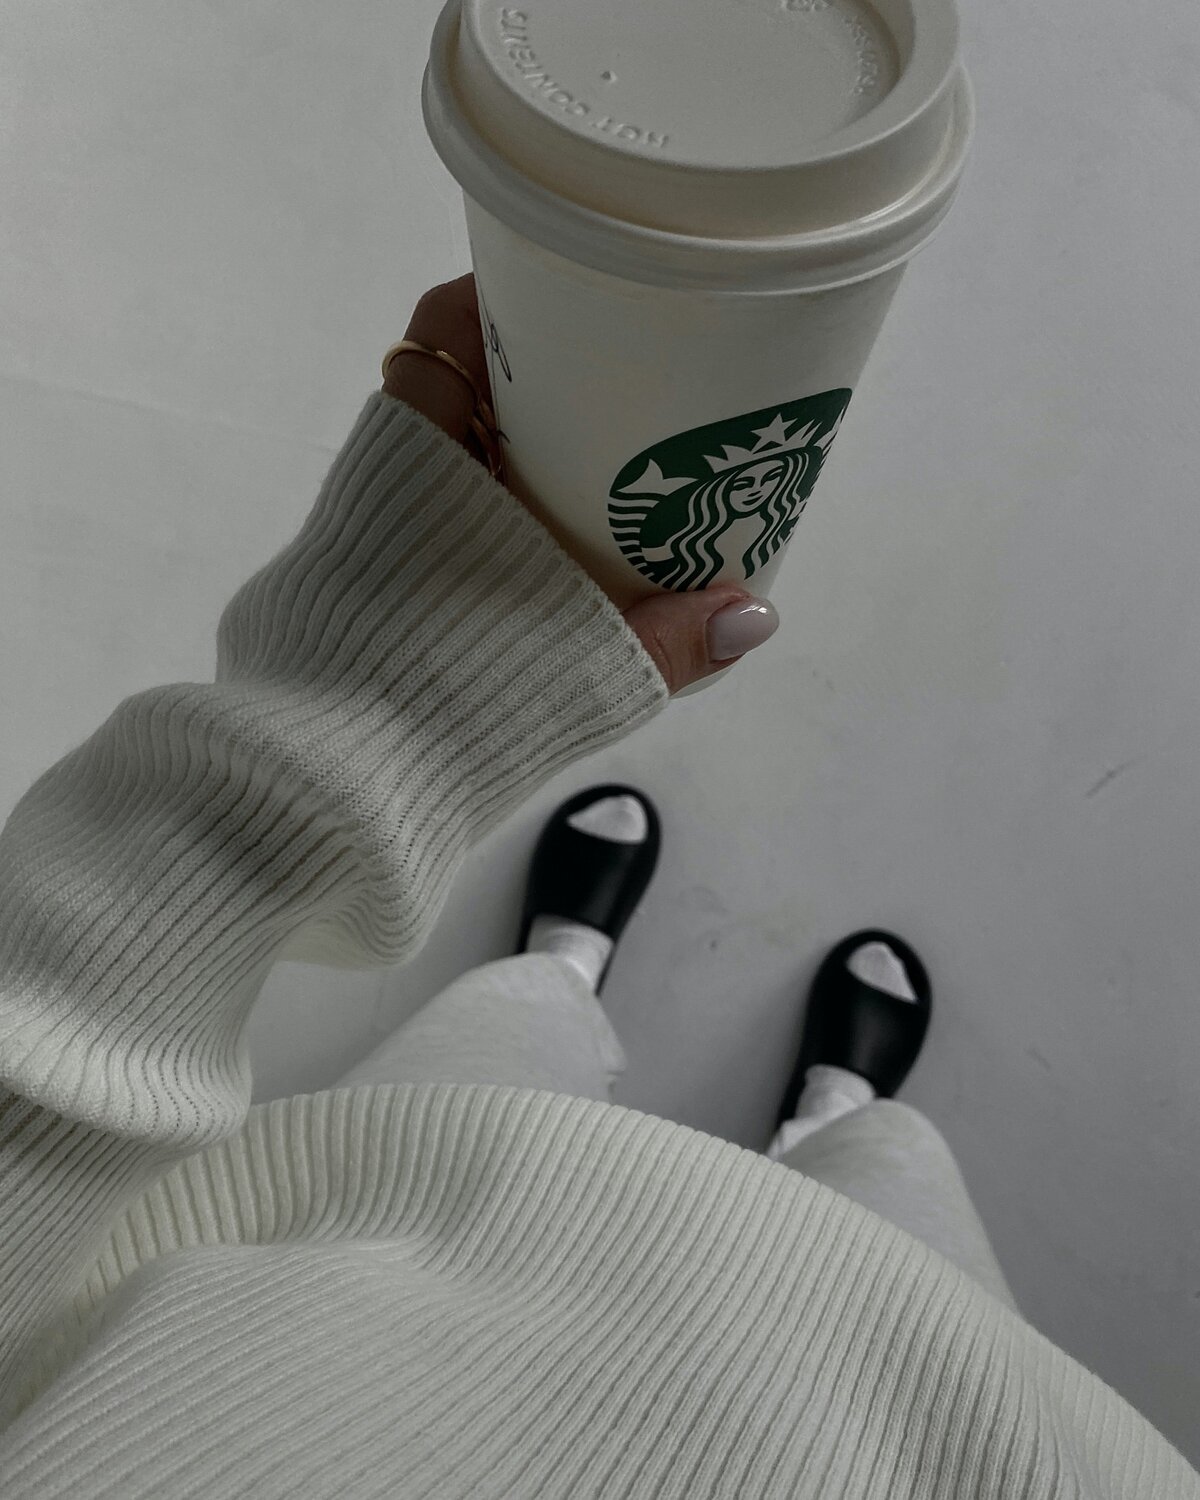 Woman in white with black sliders holding starbucks coffee